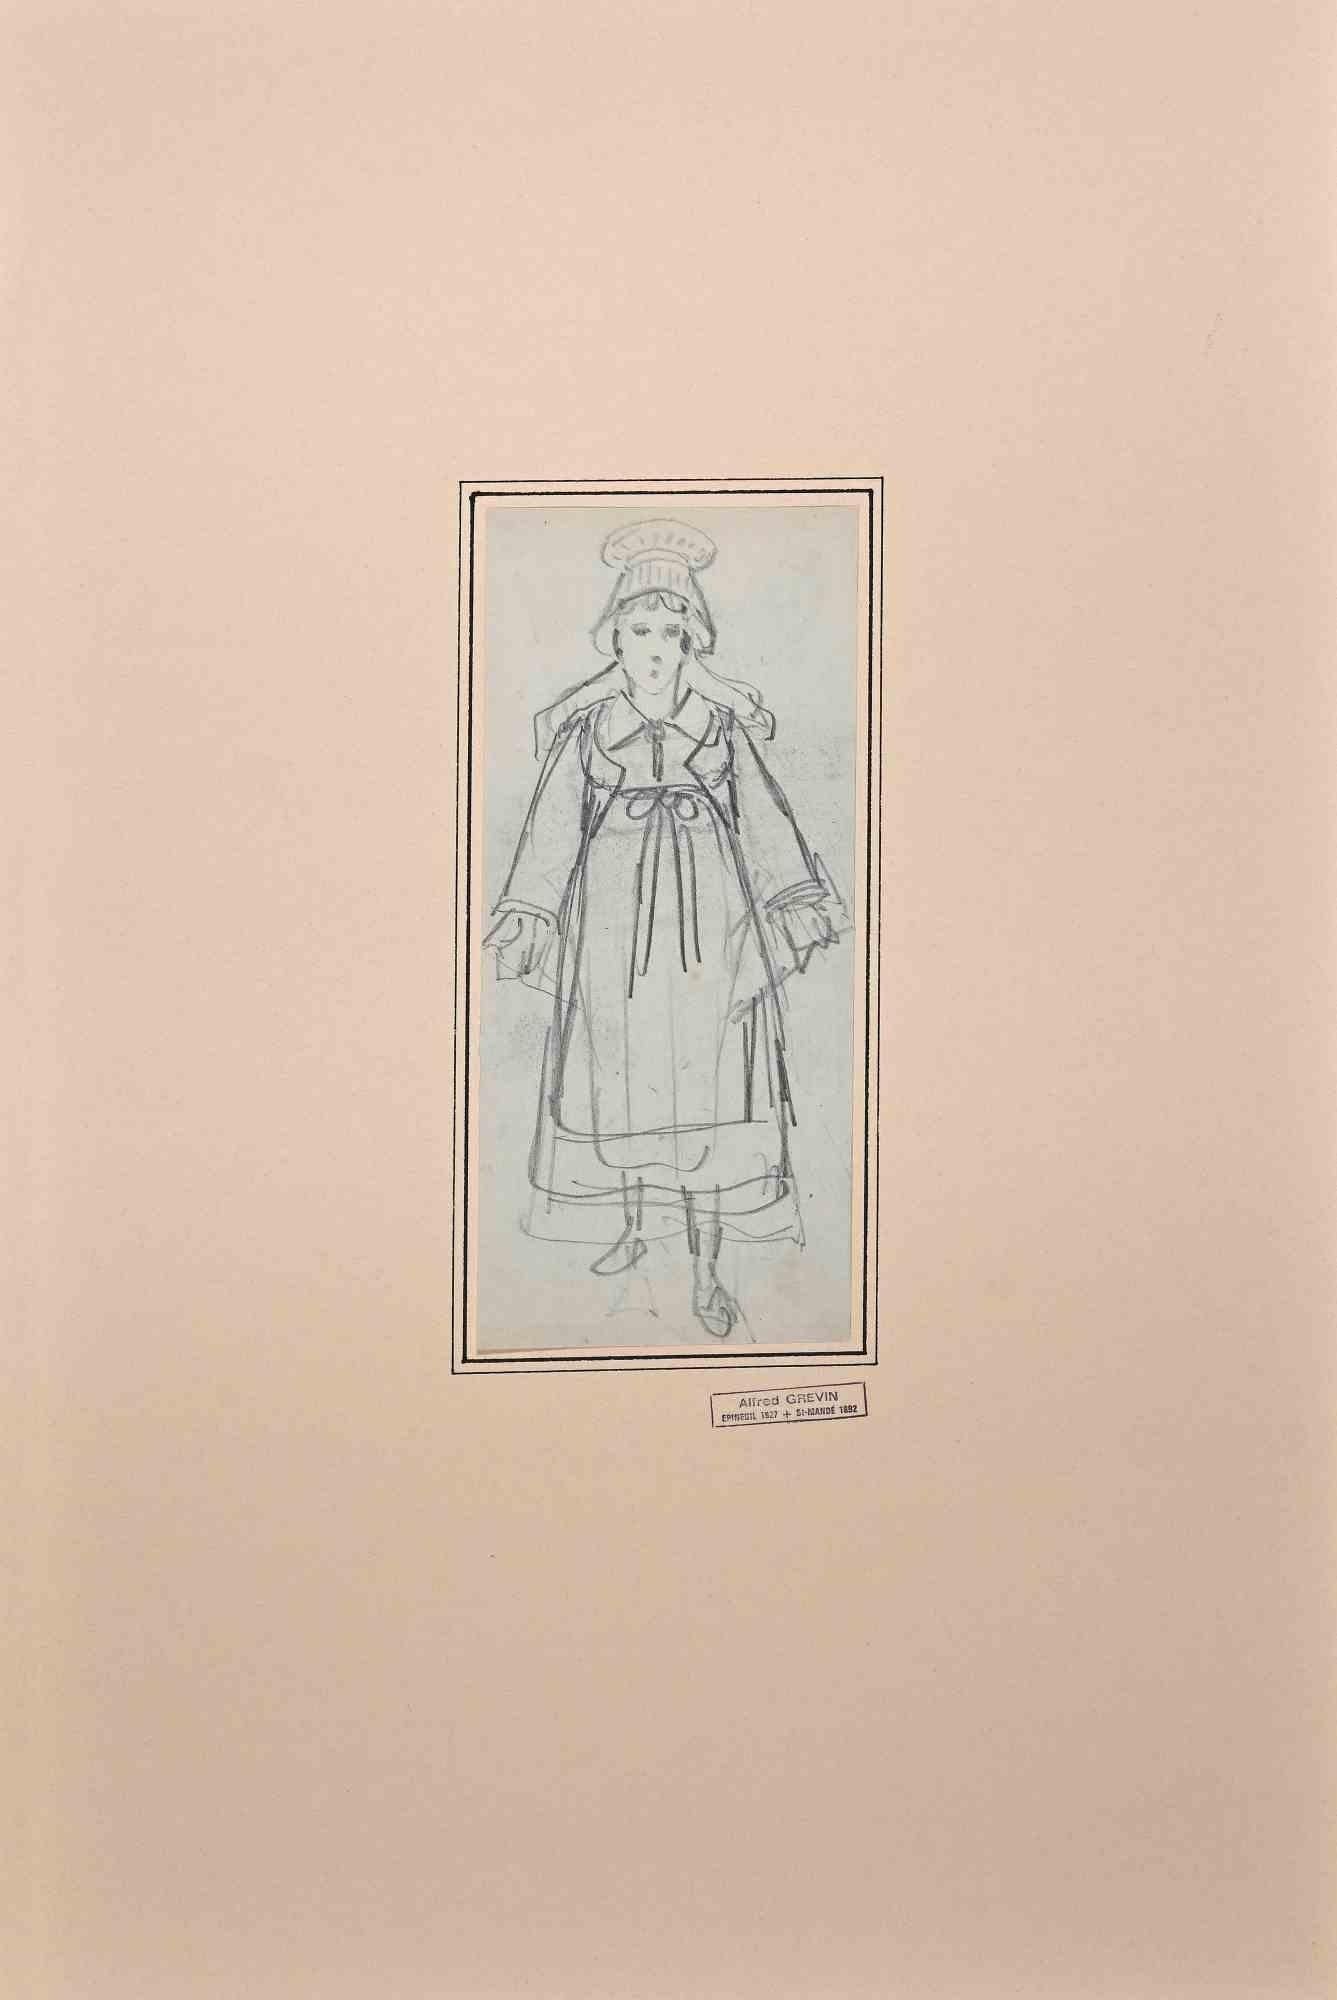 Portrait of Child  - Original pencil drawing by A. Grevin - Late 19 Century - Art by Alfred Grevin